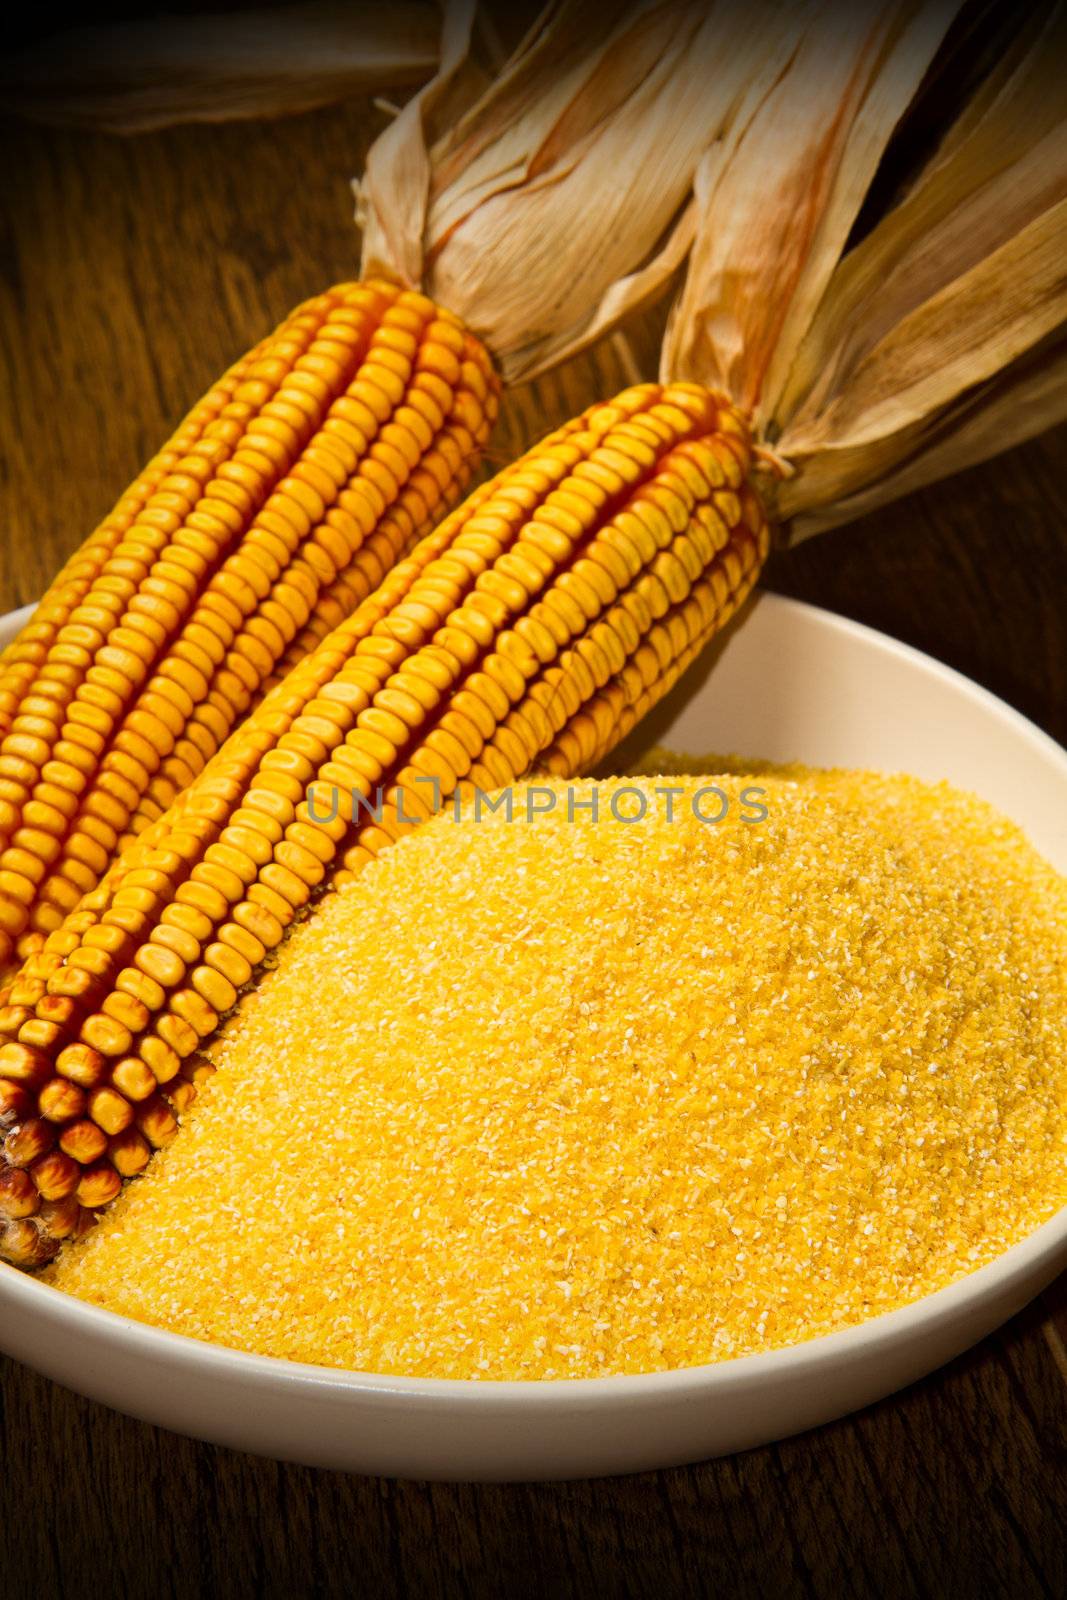 Still life with maize products 